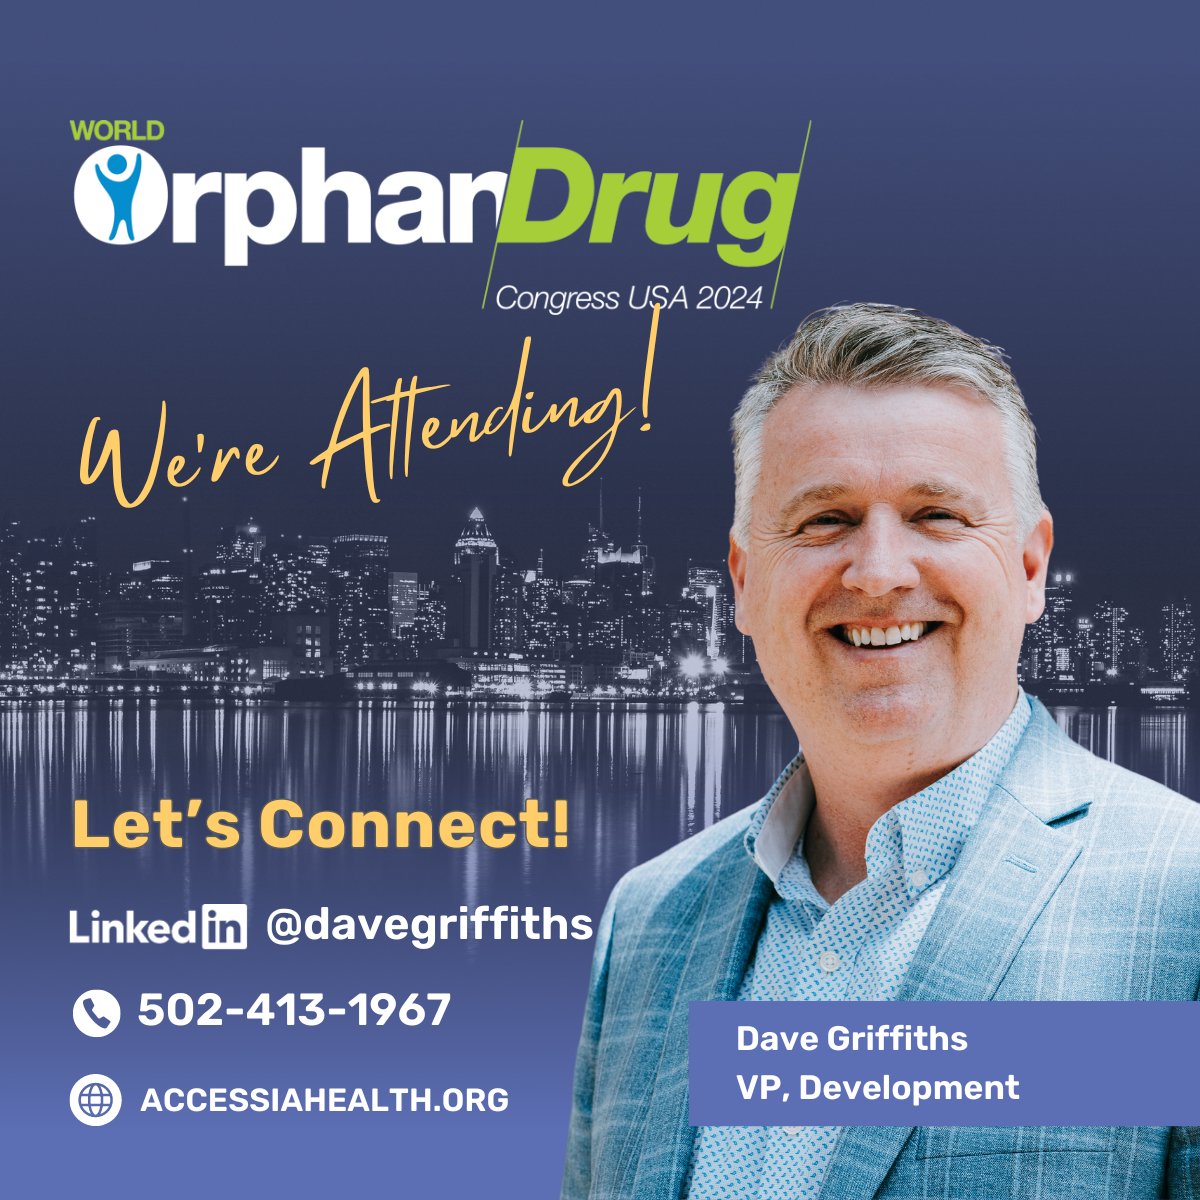 📣 Are you attending @OrphanConf in Boston next week? Connect with our VP of Development, Dave Griffiths! He's looking forward to engaging with industry experts who are shaping the future of orphan drug development.
 
#WorldOrphanUSA #RareDiseases #PatientAdvocacy